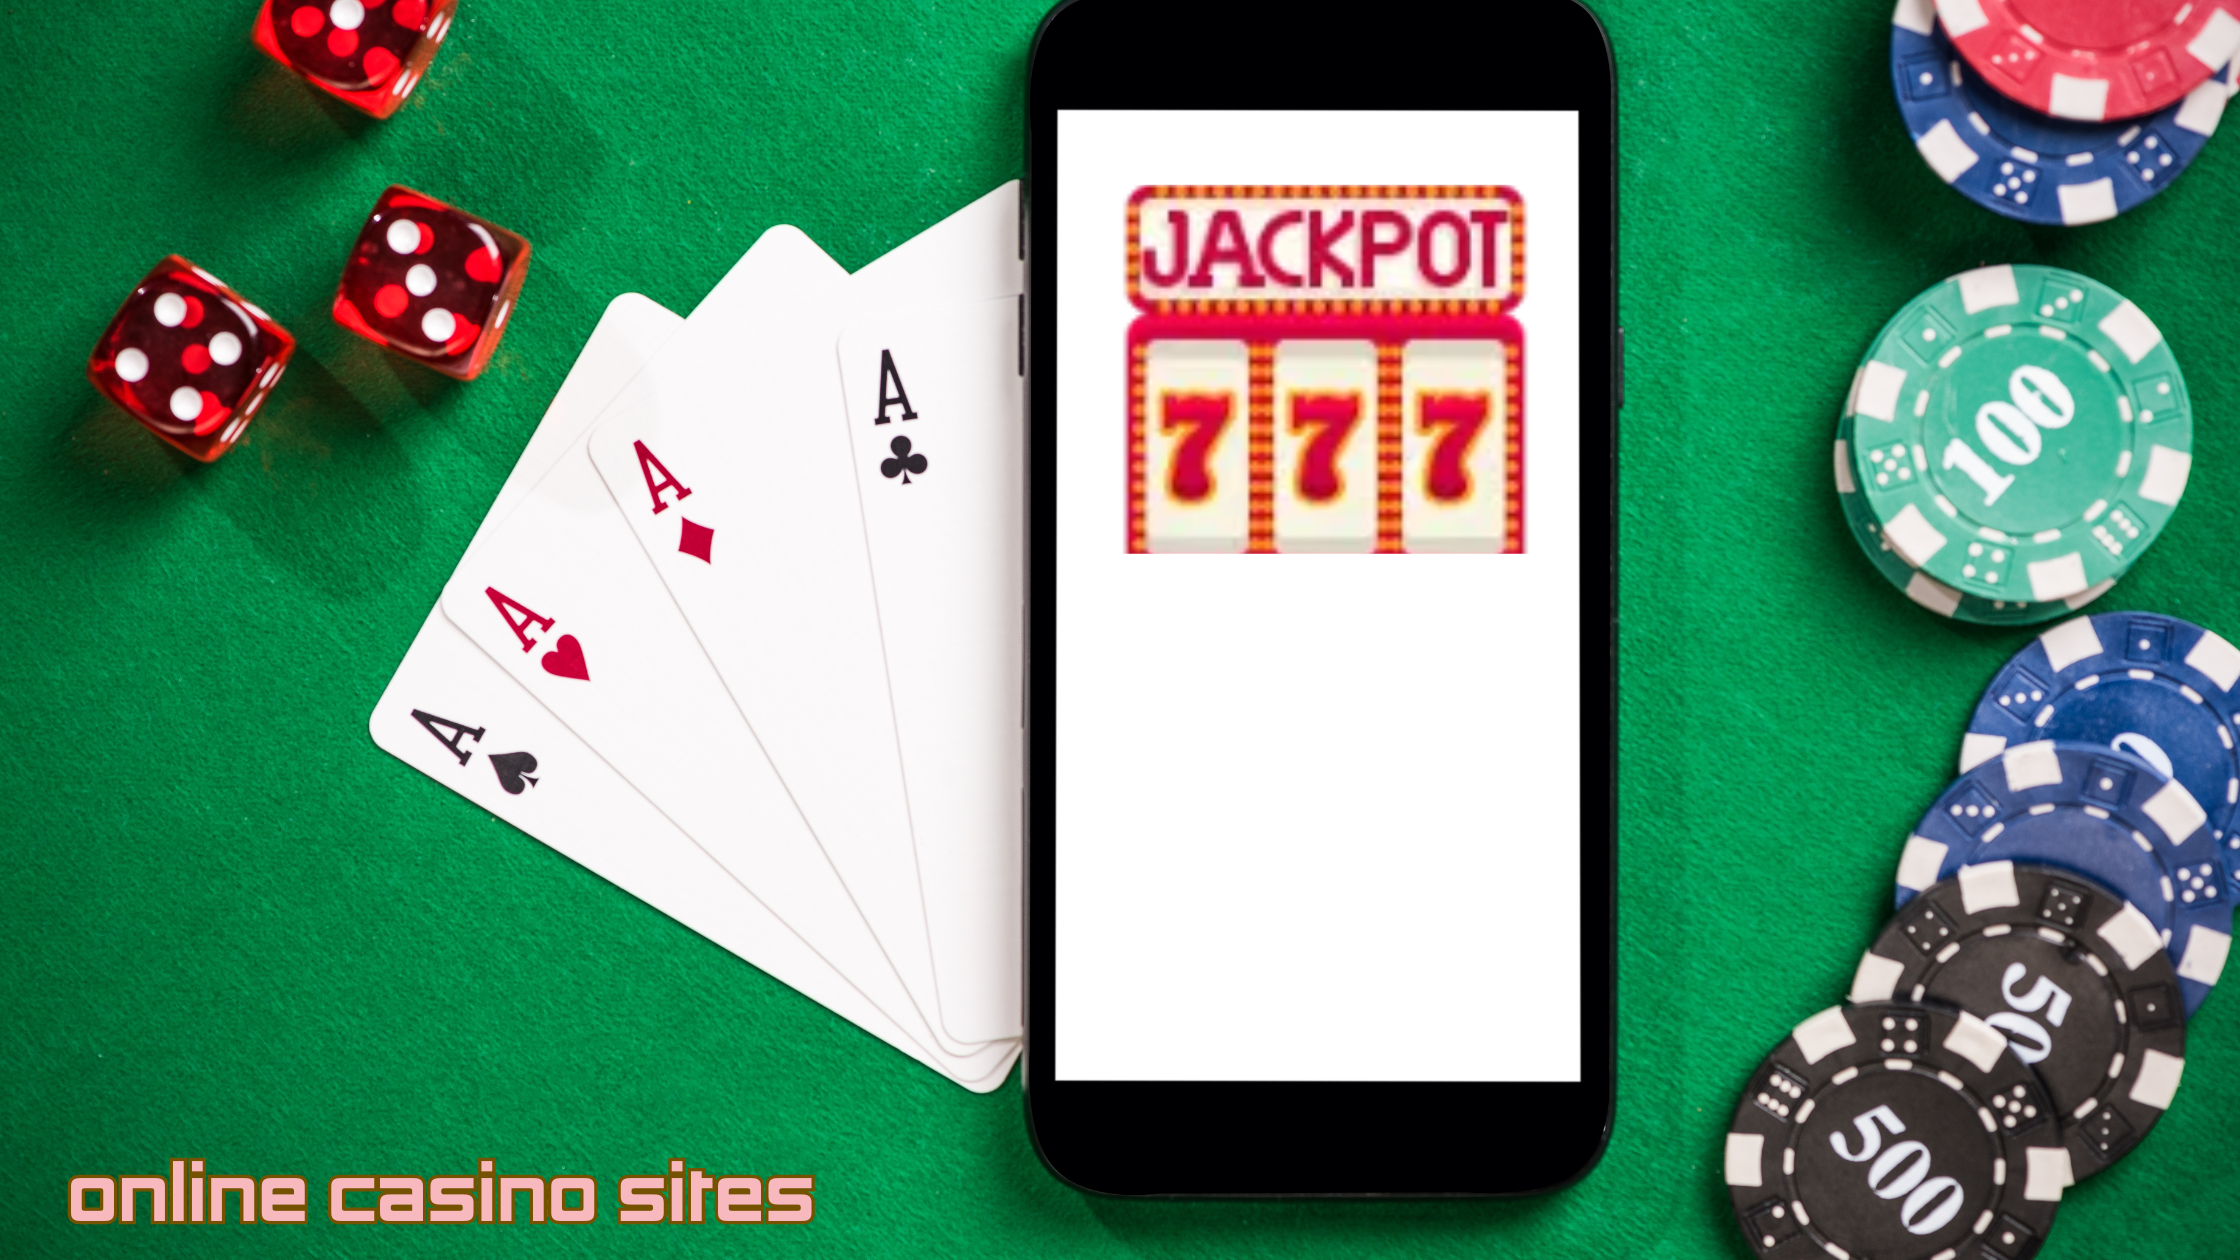 Online Casino Sites: Your Passport to 24/7 Gaming